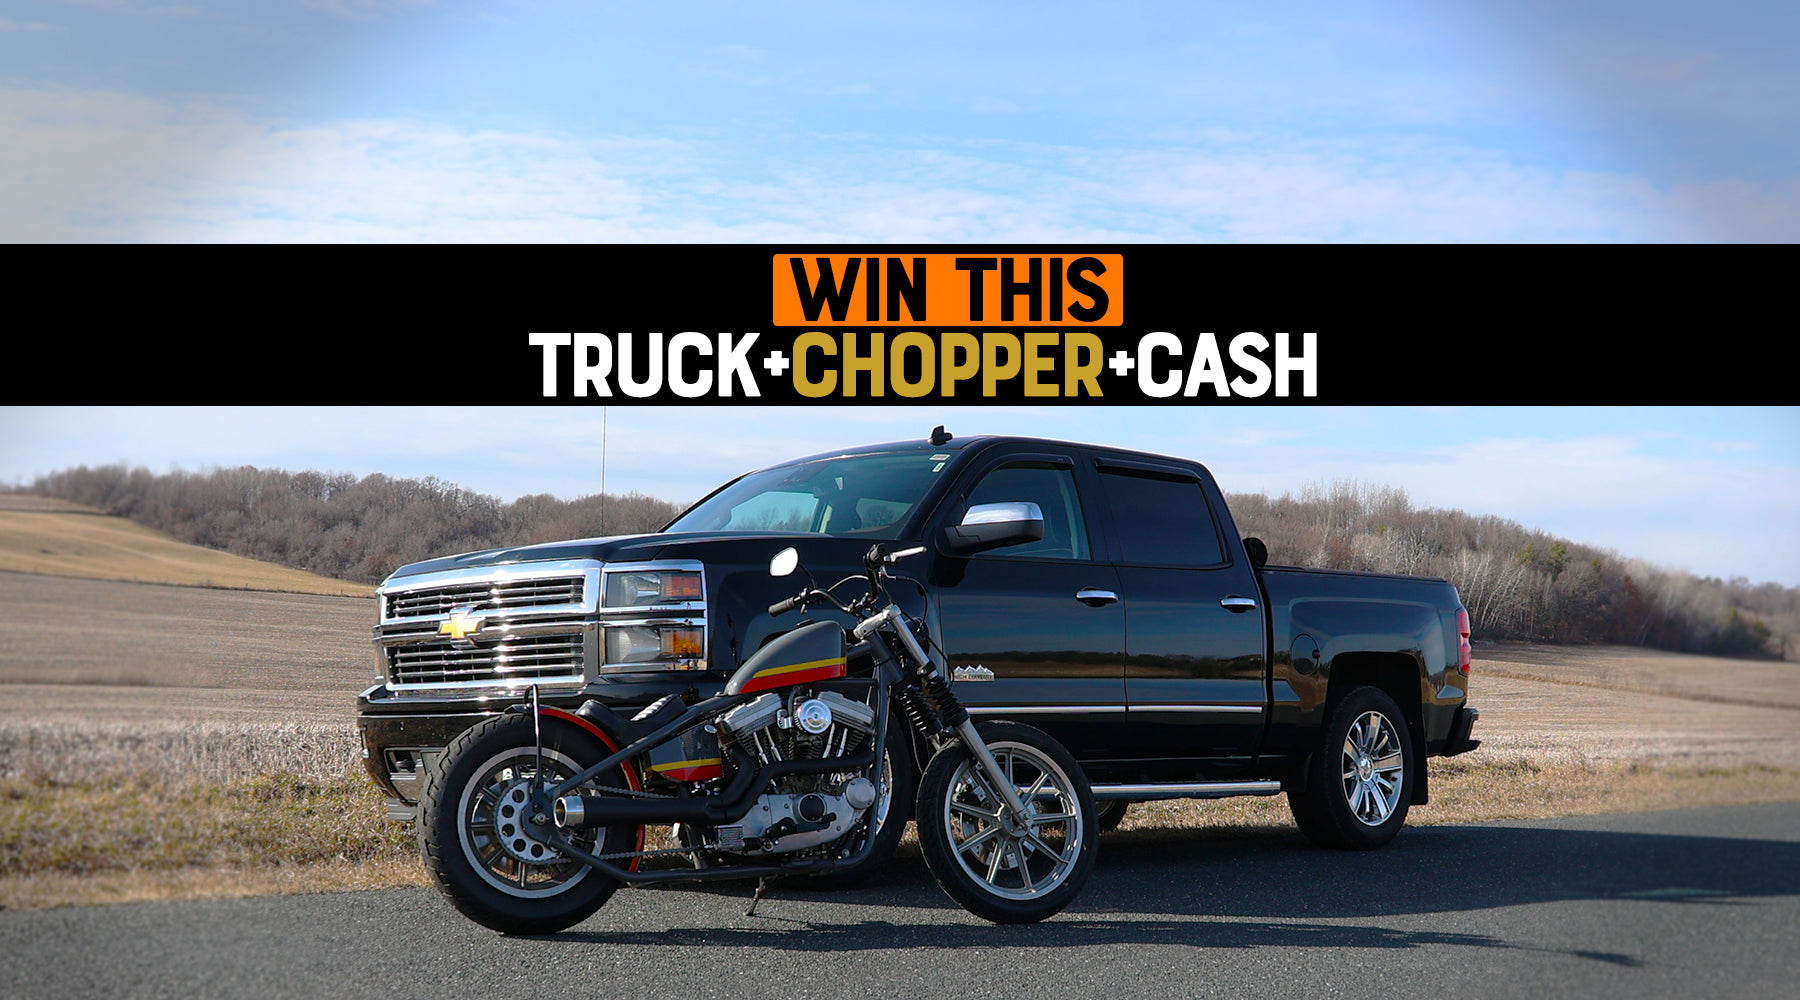 Win this truck custom sportster and cash, bike and truck in a field